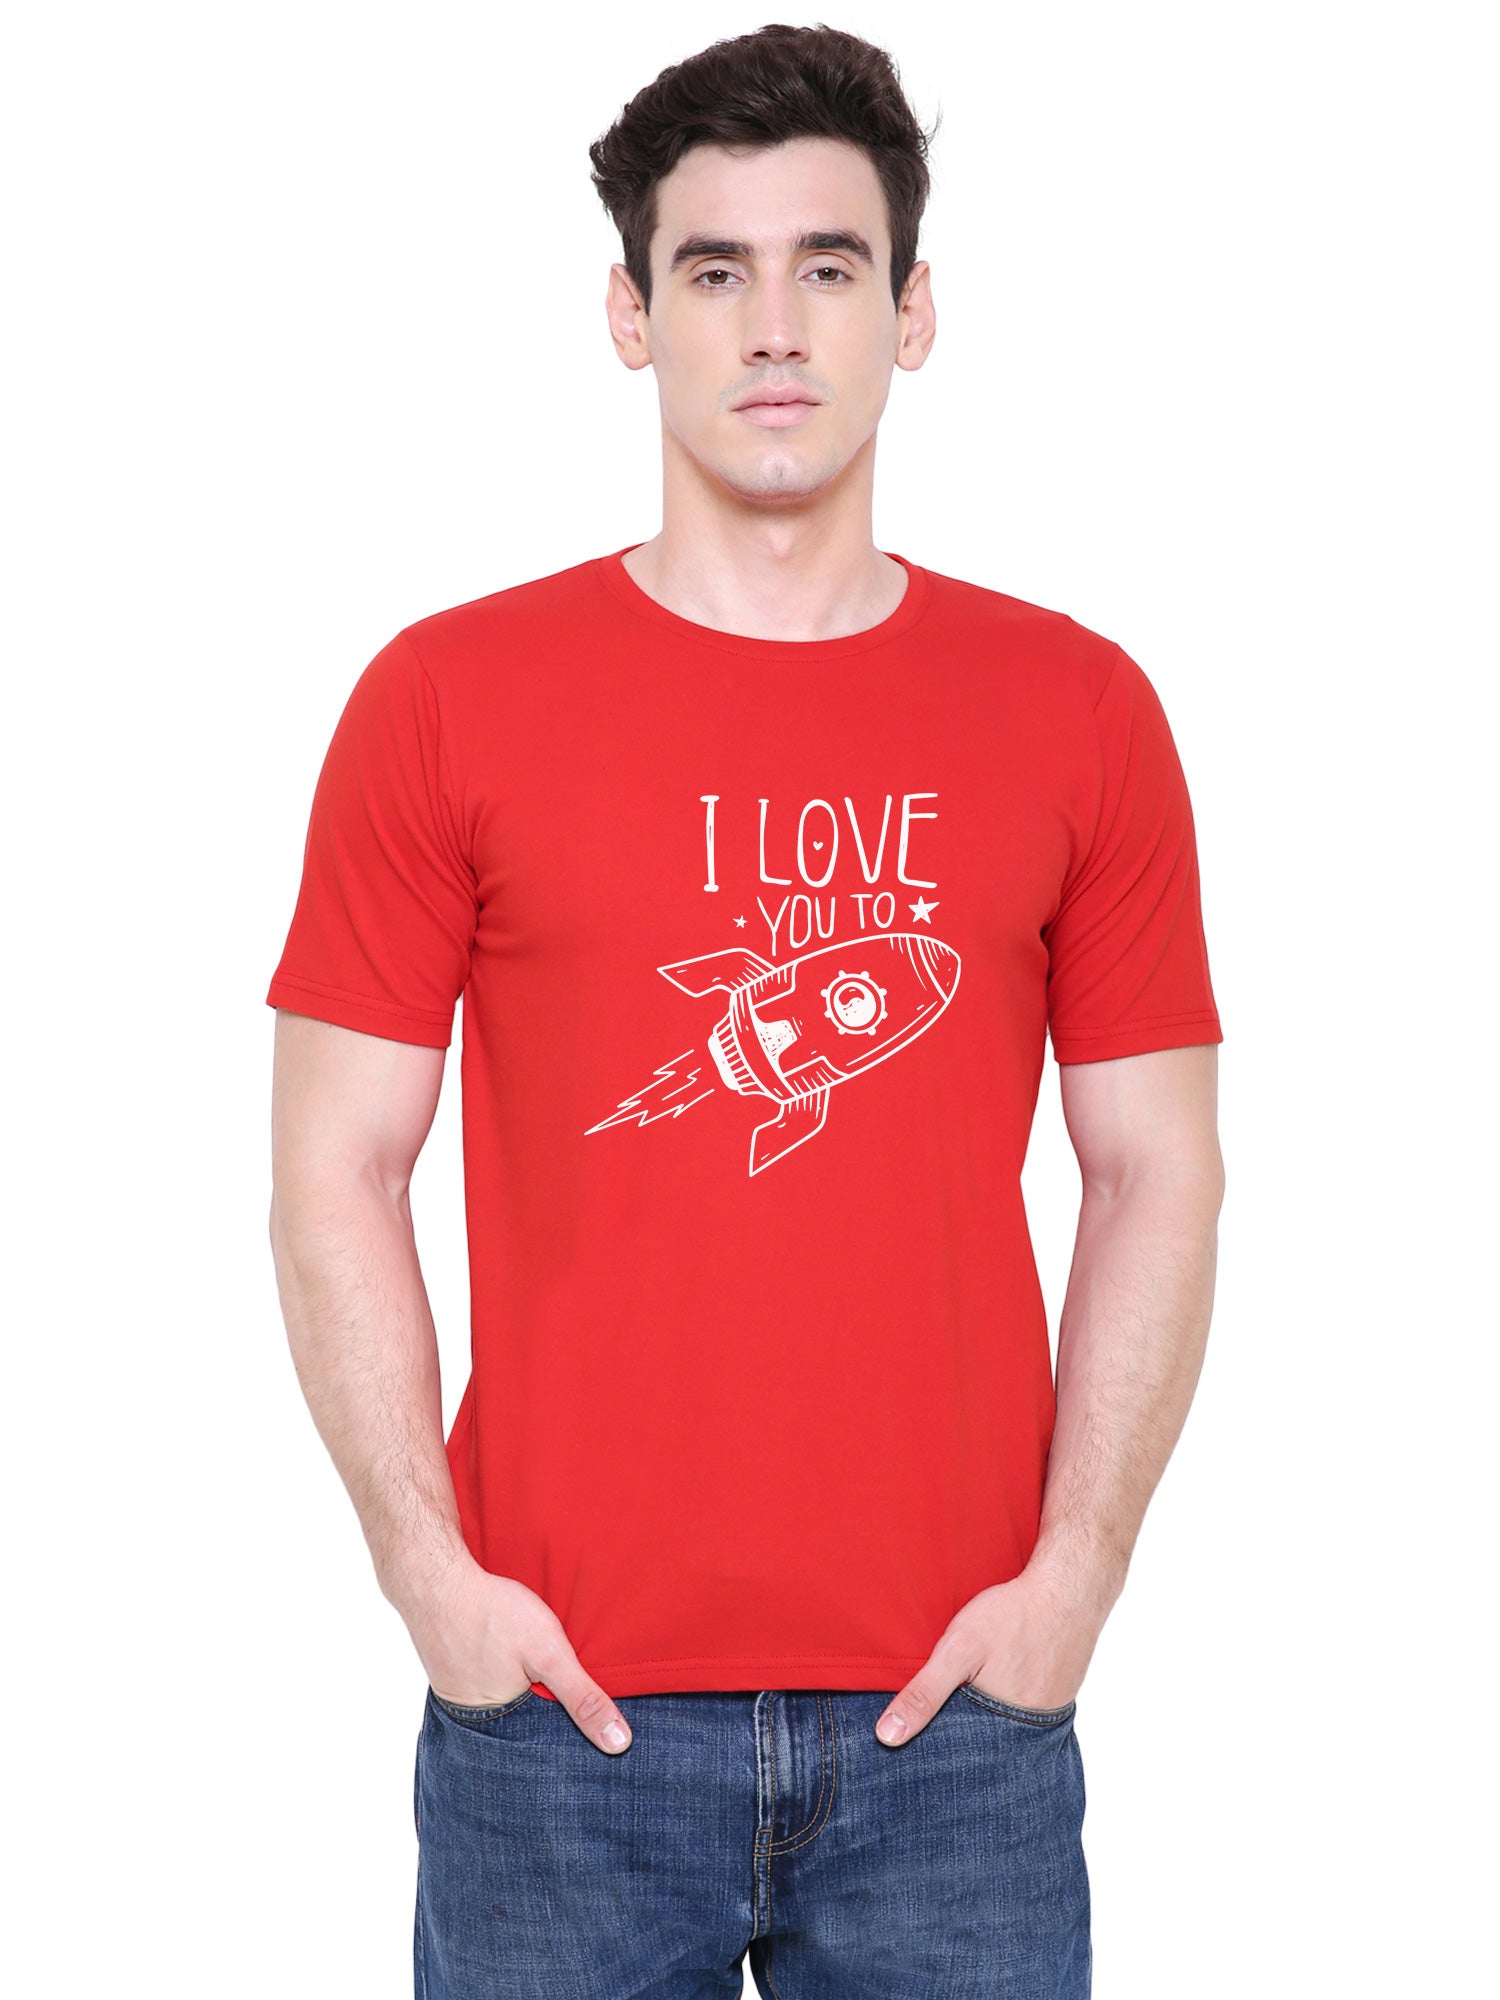 I love you to the moon & back matching Couple T shirts- Red